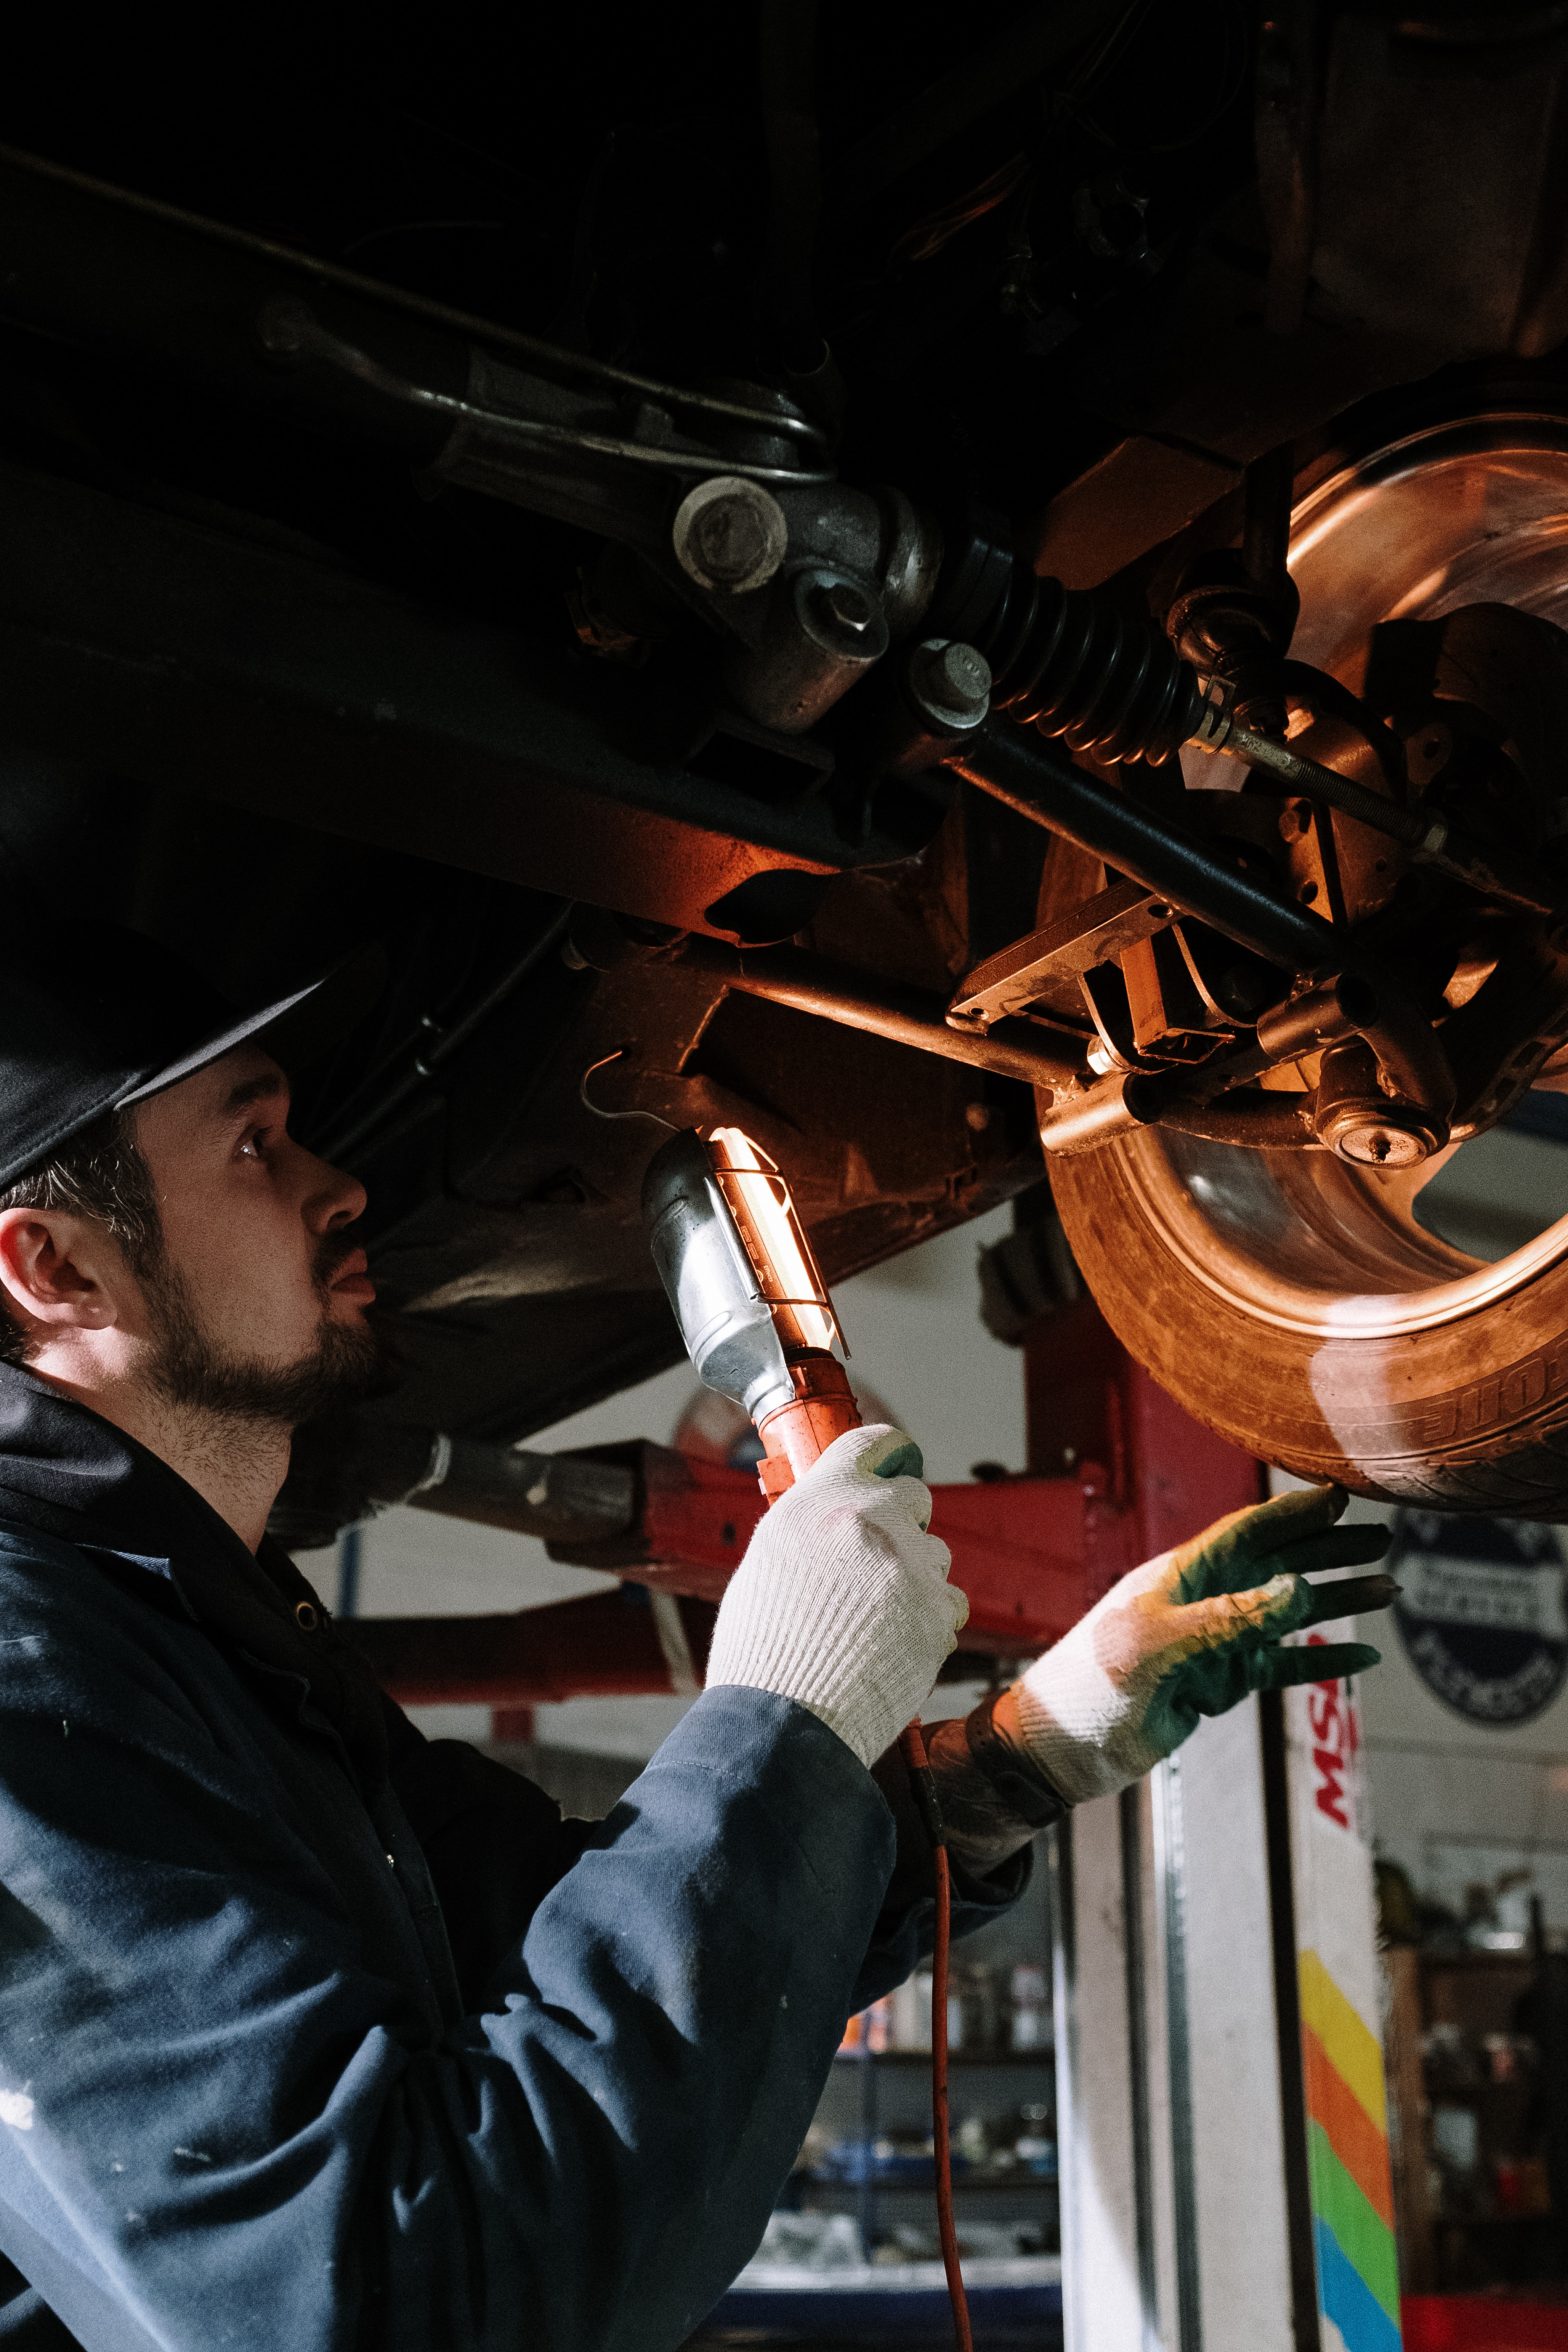 5 Potential Issues You Should Have Your Mechanic Look at Any Time You Take Your Car In